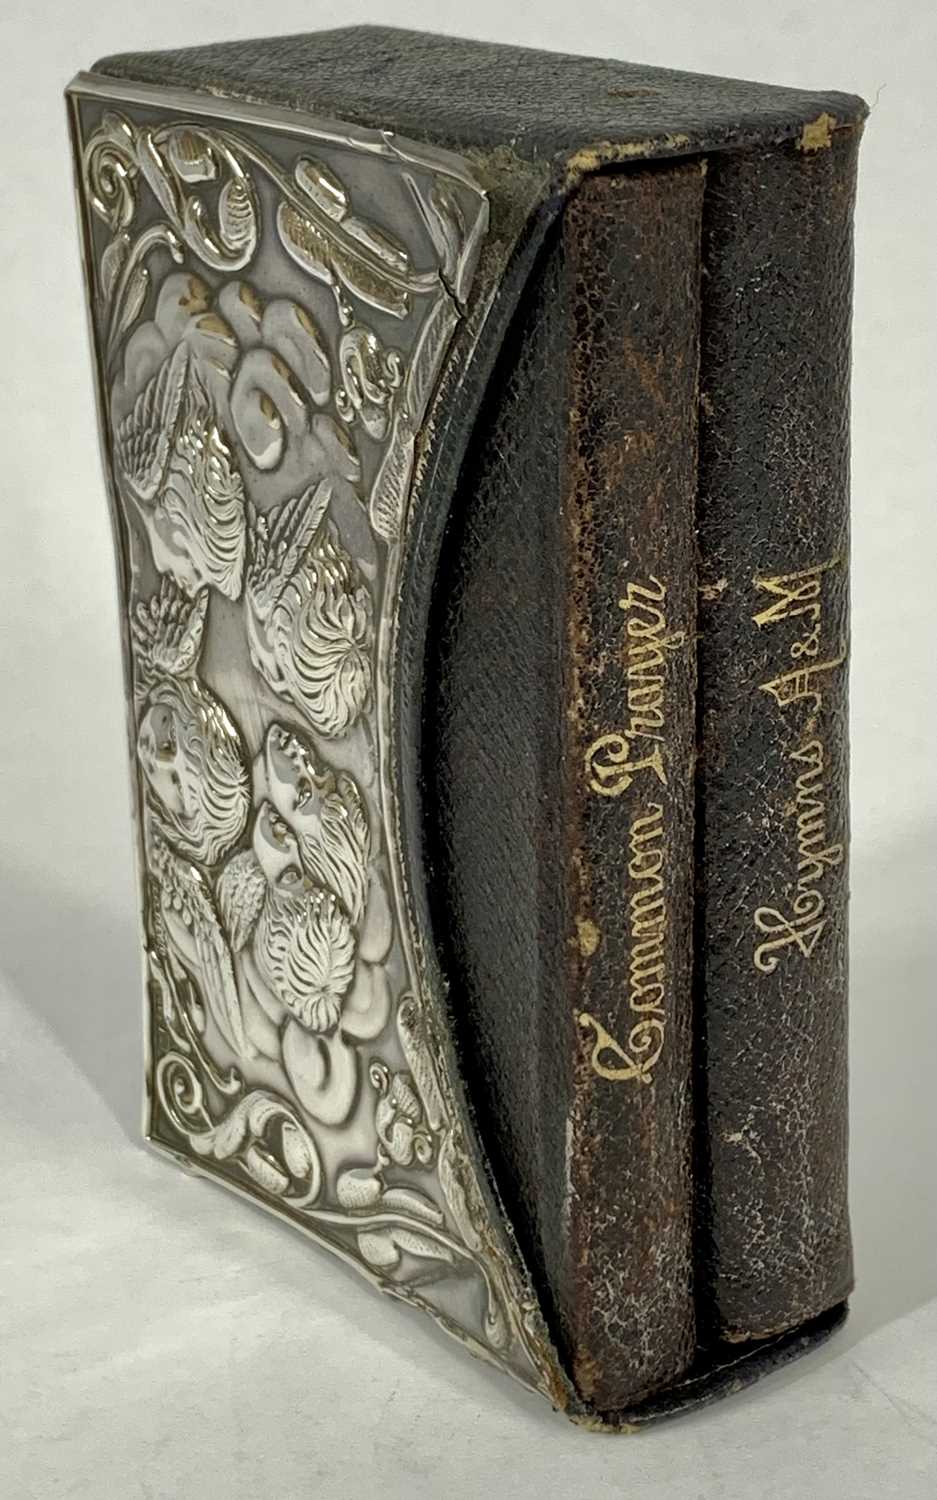 PRAYER & HYMN BOOKS WITH SILVER COVER, embossed with cherubs, heads and scrolls, containing